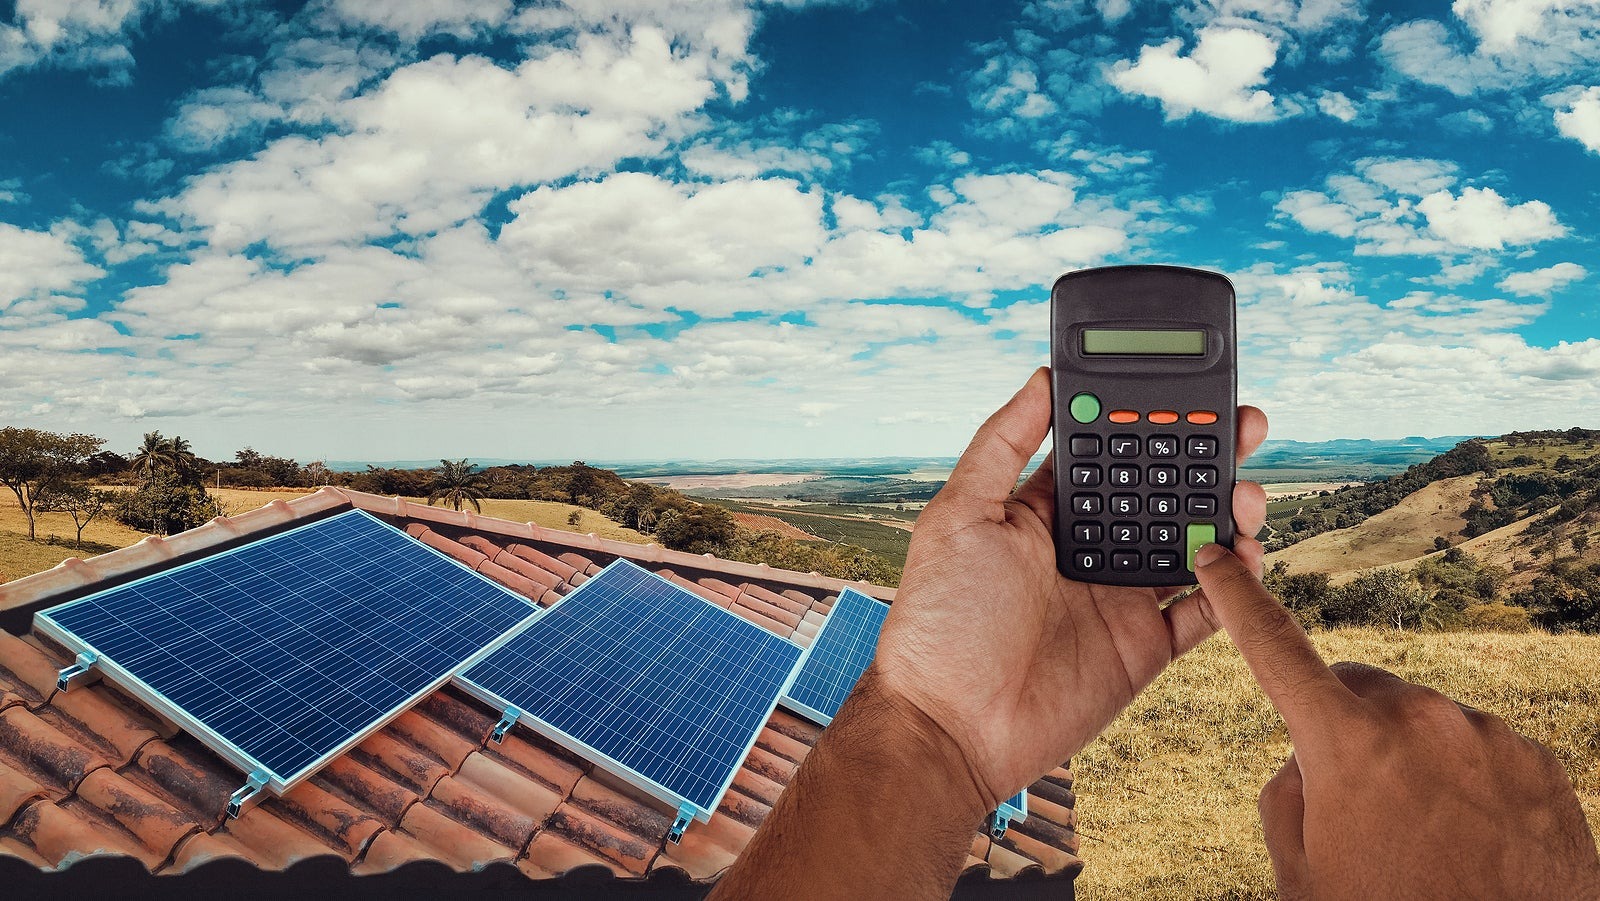 Tax exemptions for home solar power - how to save on sales and property taxes